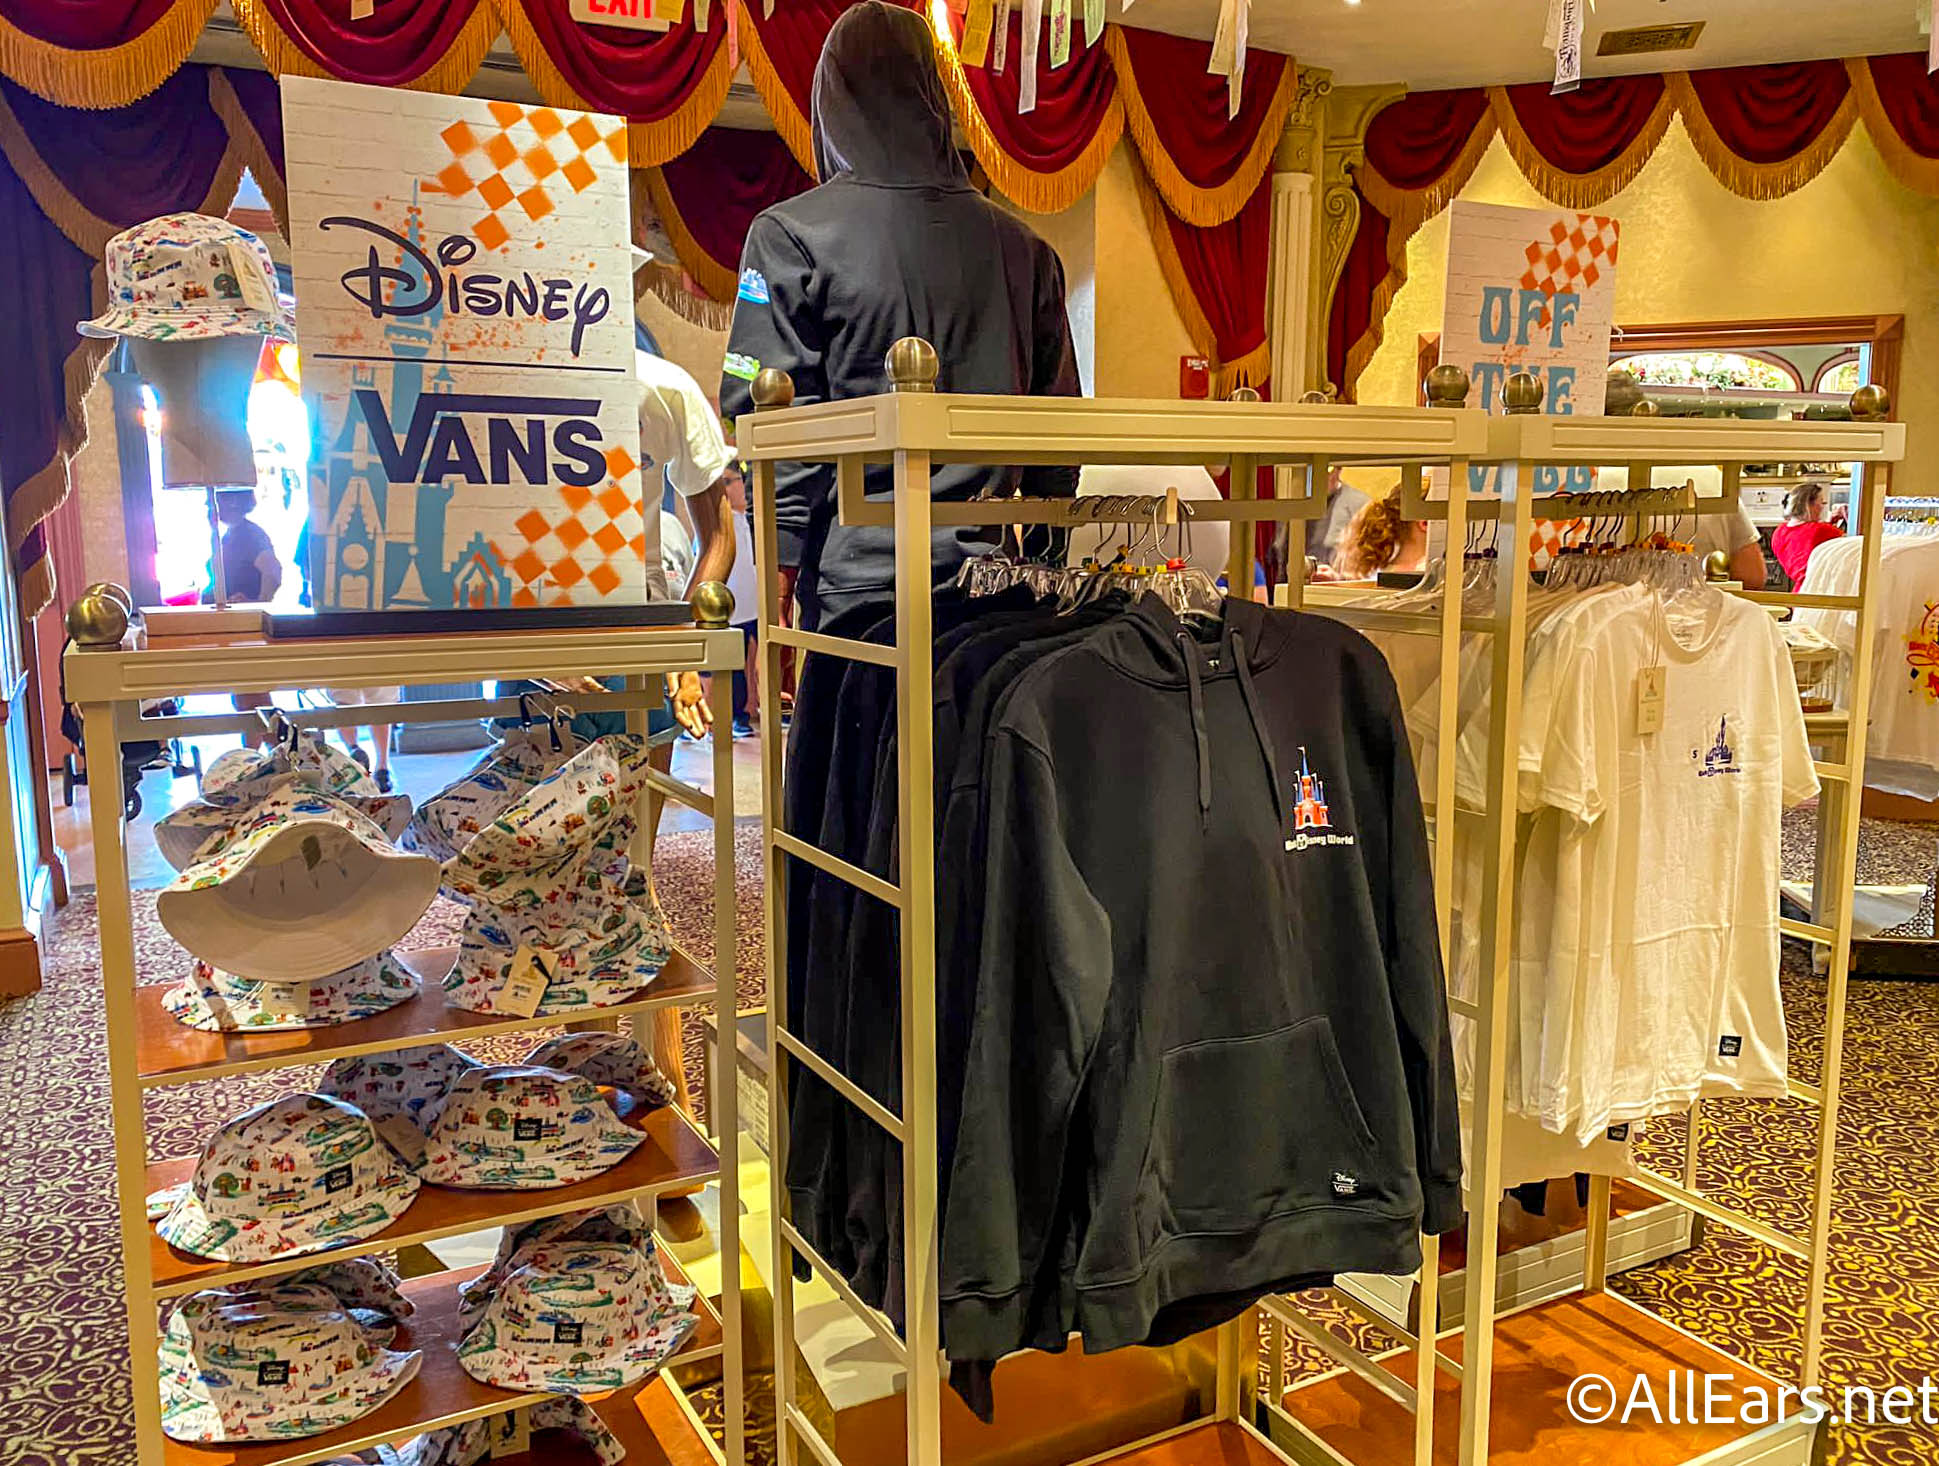 MORE Disney x Vans 50th Anniversary Items Have Arrived at Disney World! -  AllEars.Net